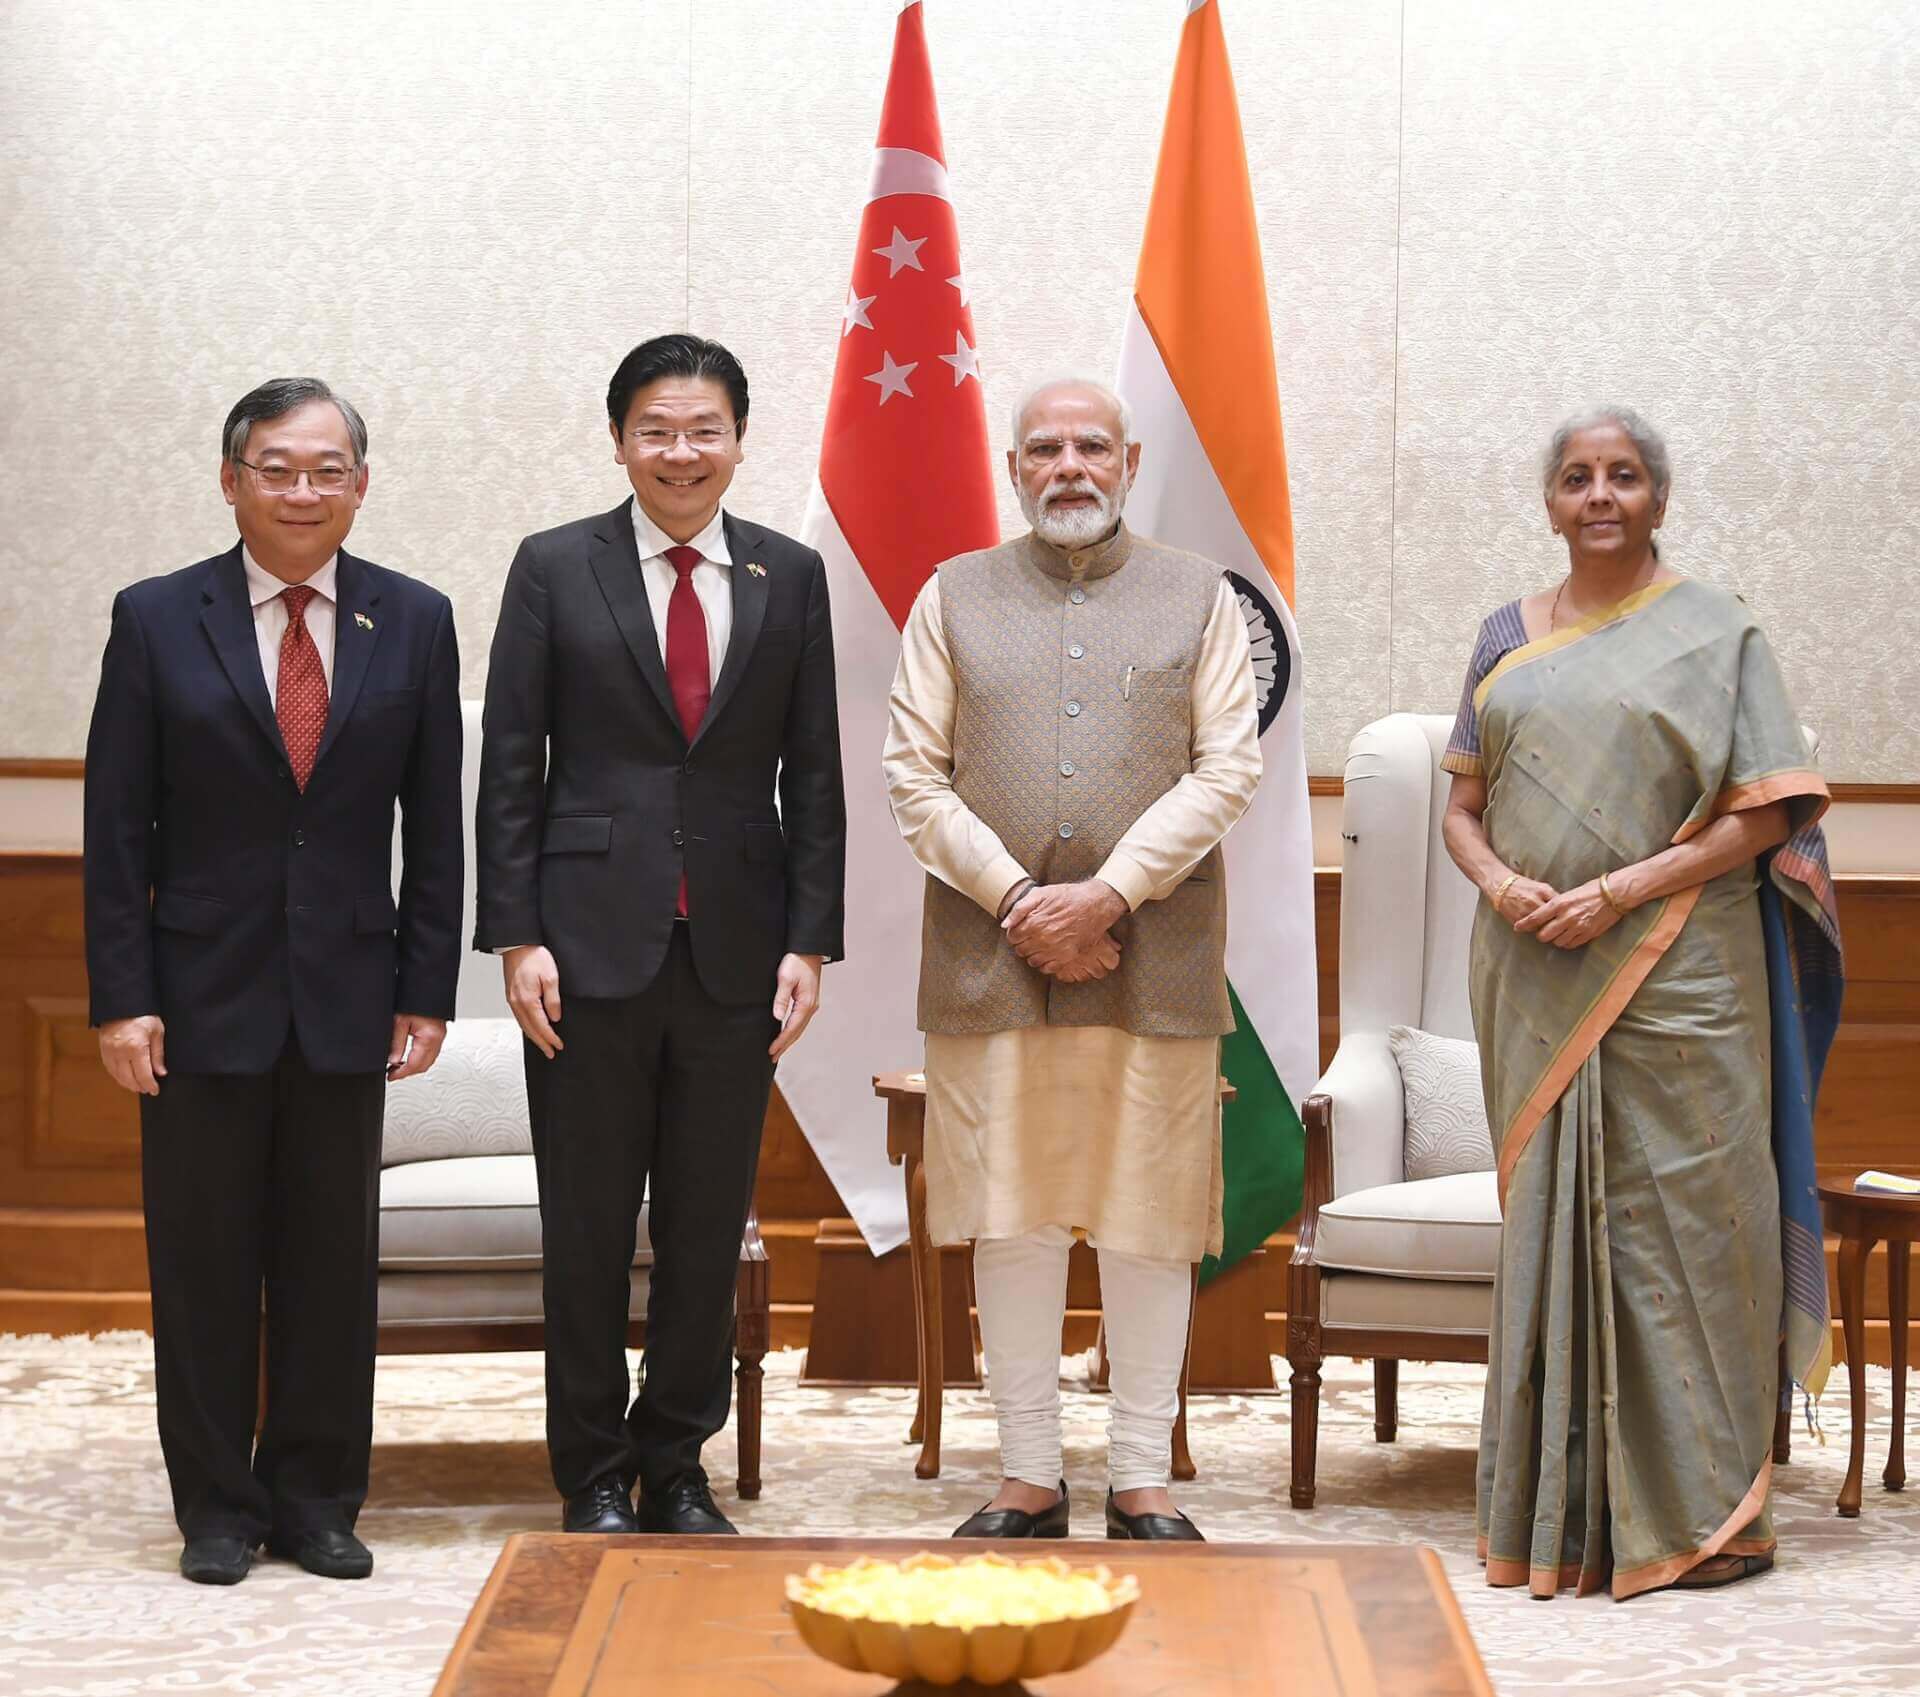 India, Singapore Discuss Cooperation in Clean Energy, Fintech